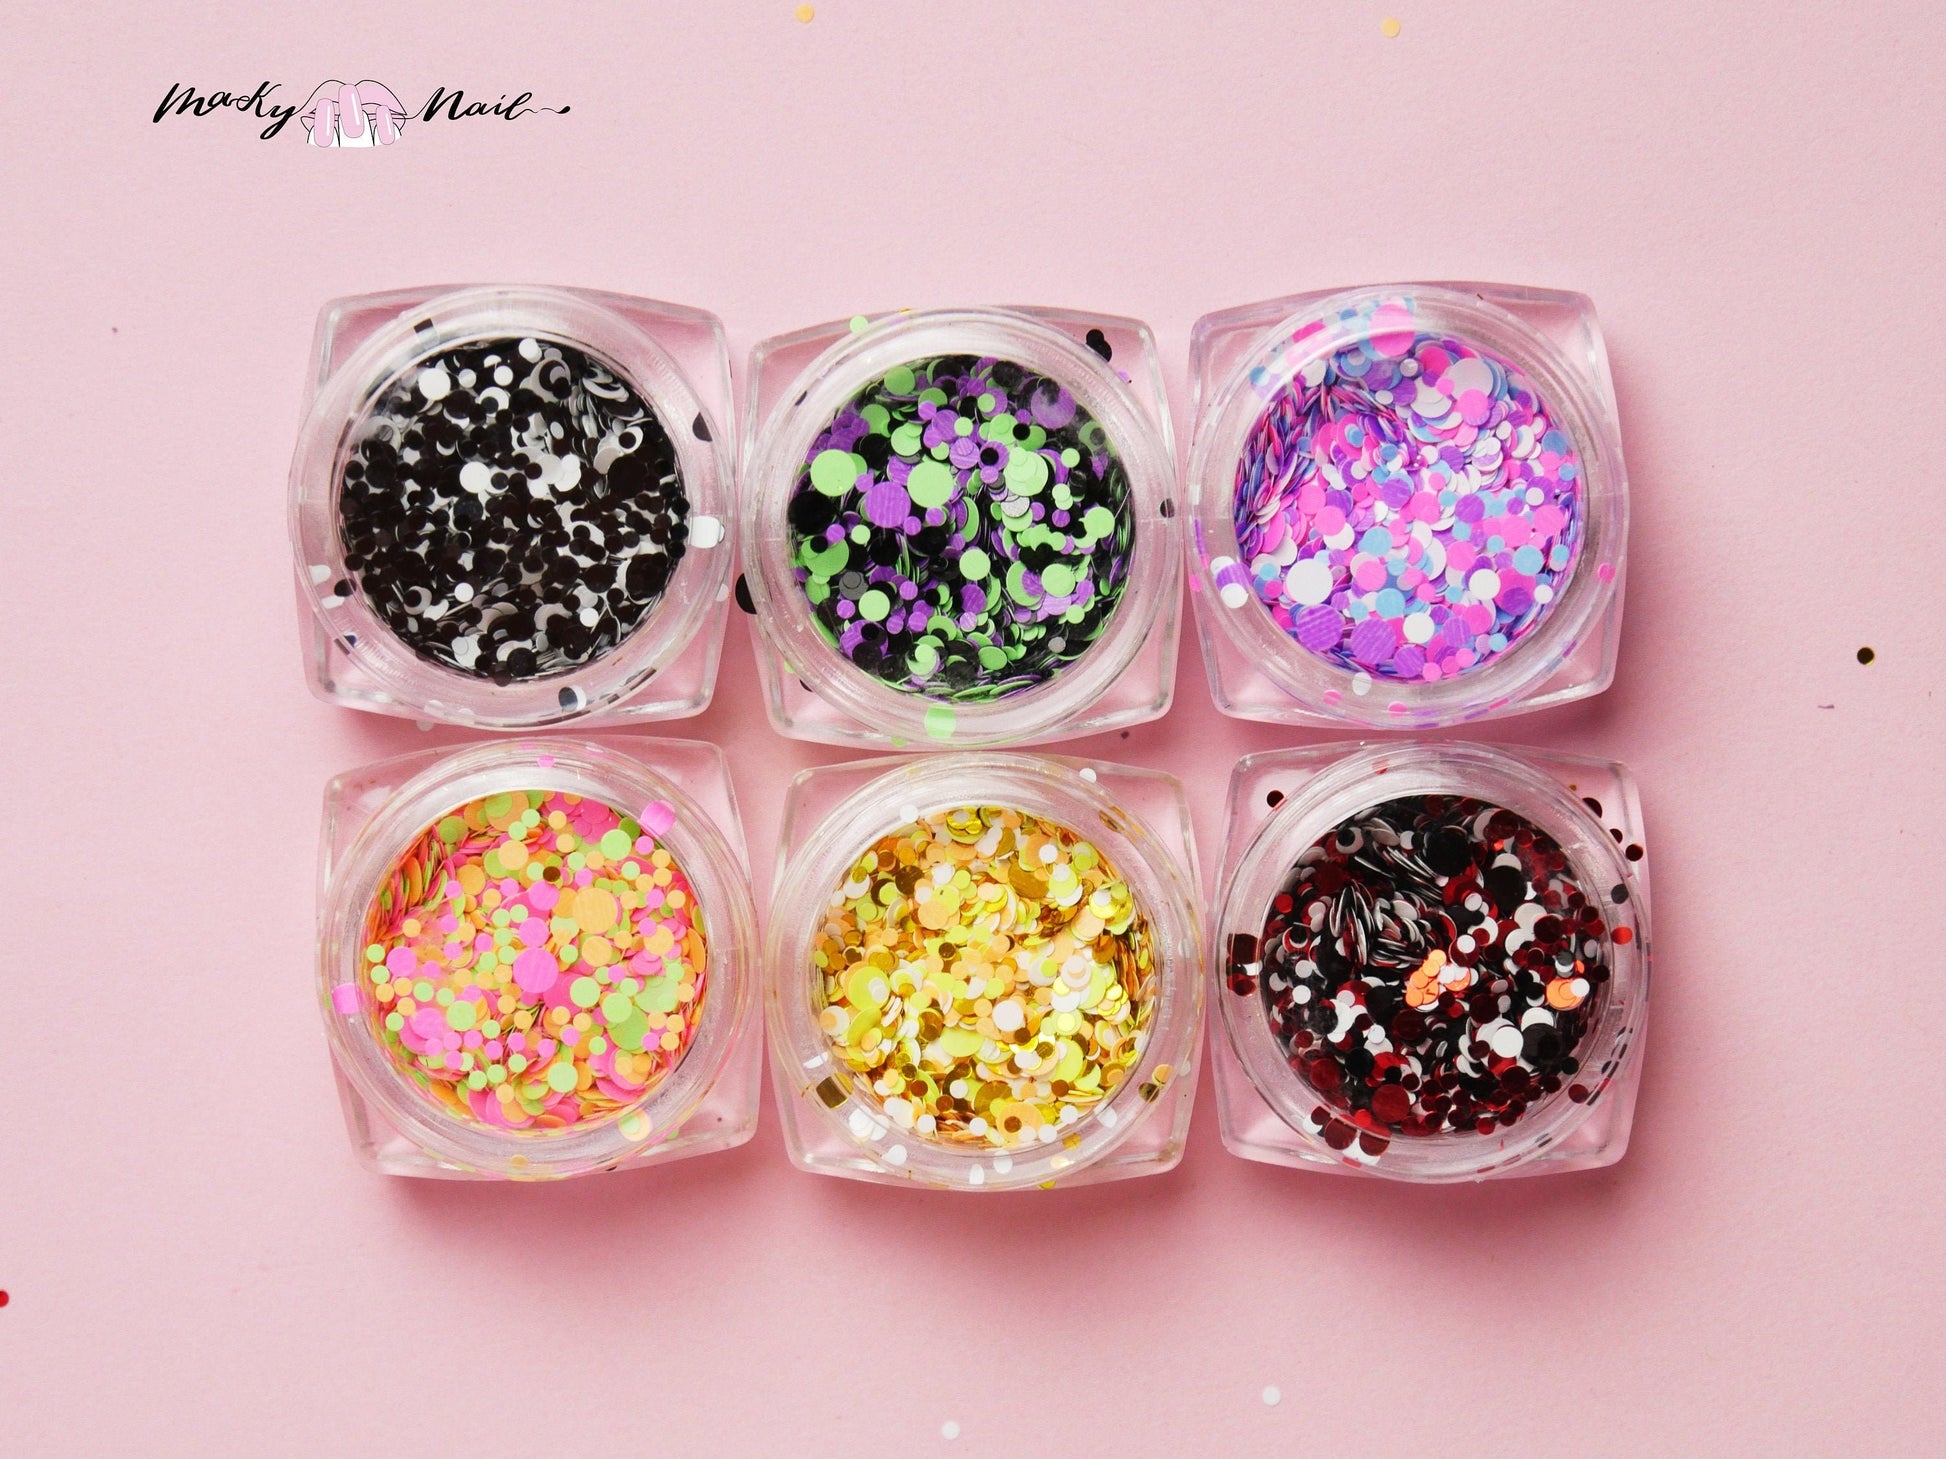 6 jars round Sequins/ Mix sized Rainbow Laser Sequins Nail Art glitter set/ Colorful DIY round flakes for UV resin uv gel nail design